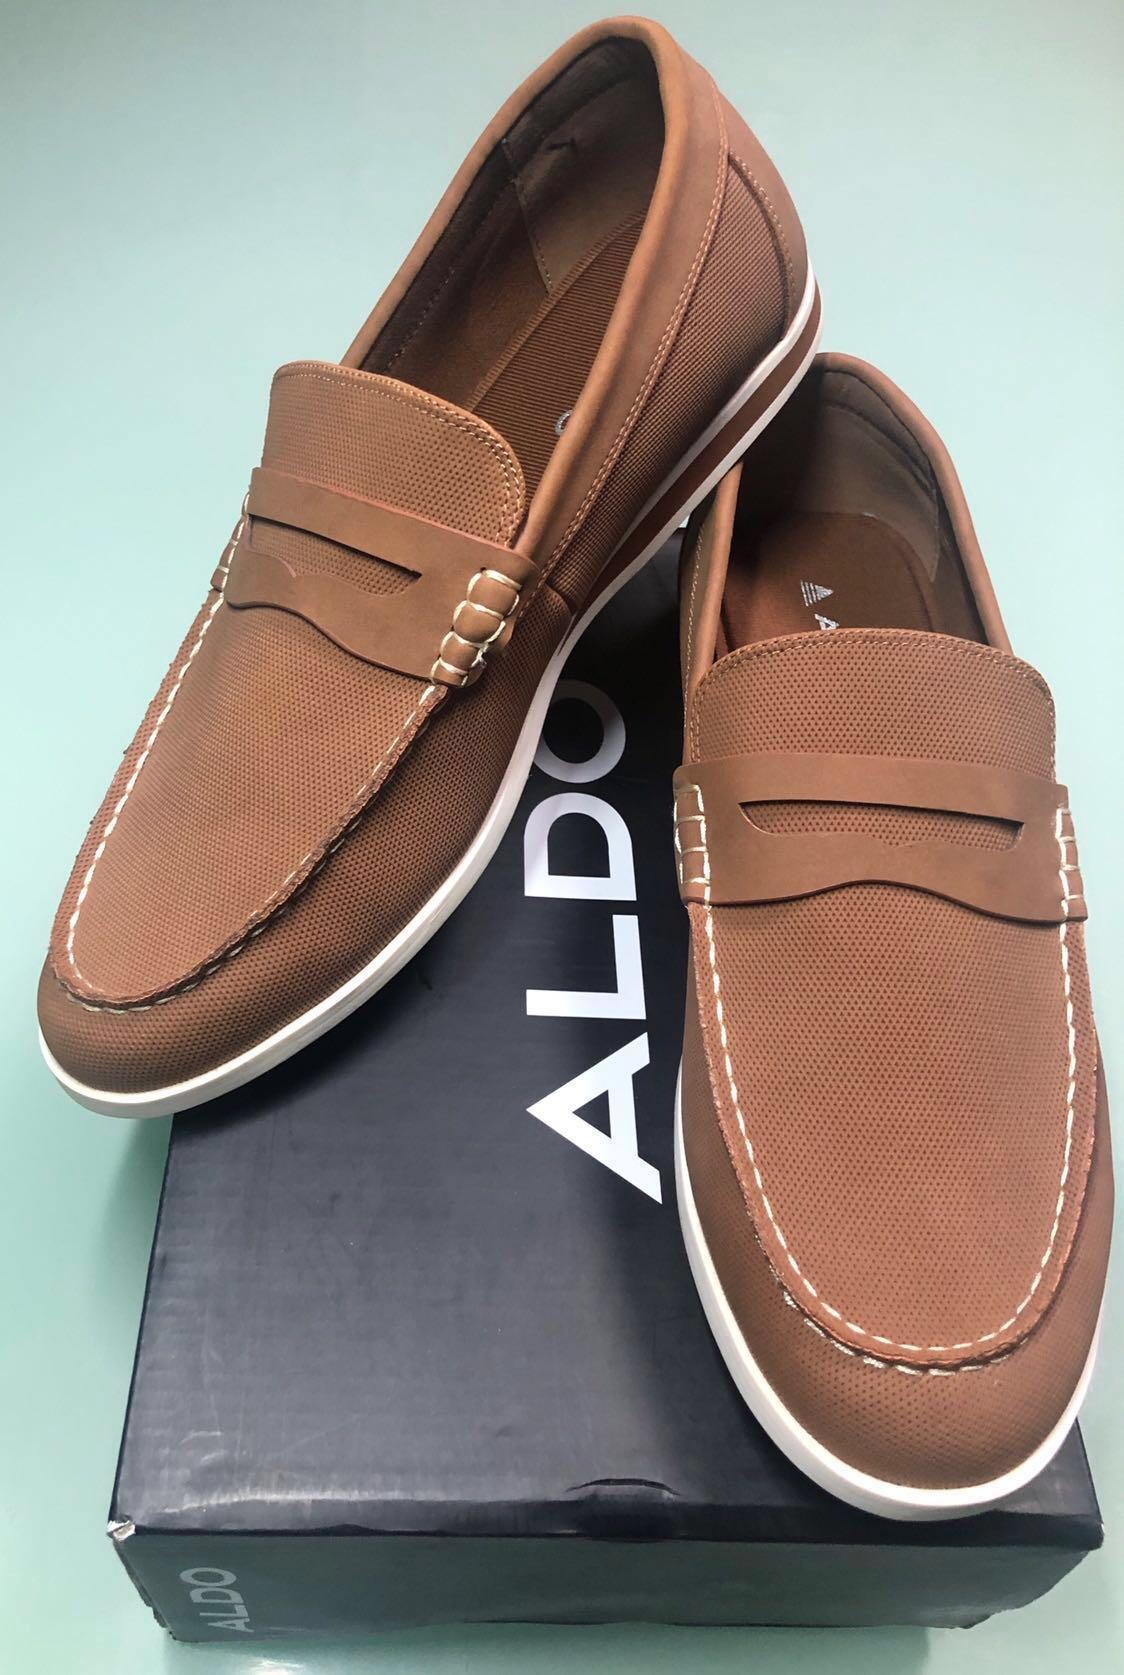 ALDO shoes Casual Brown Loafers, Men's 